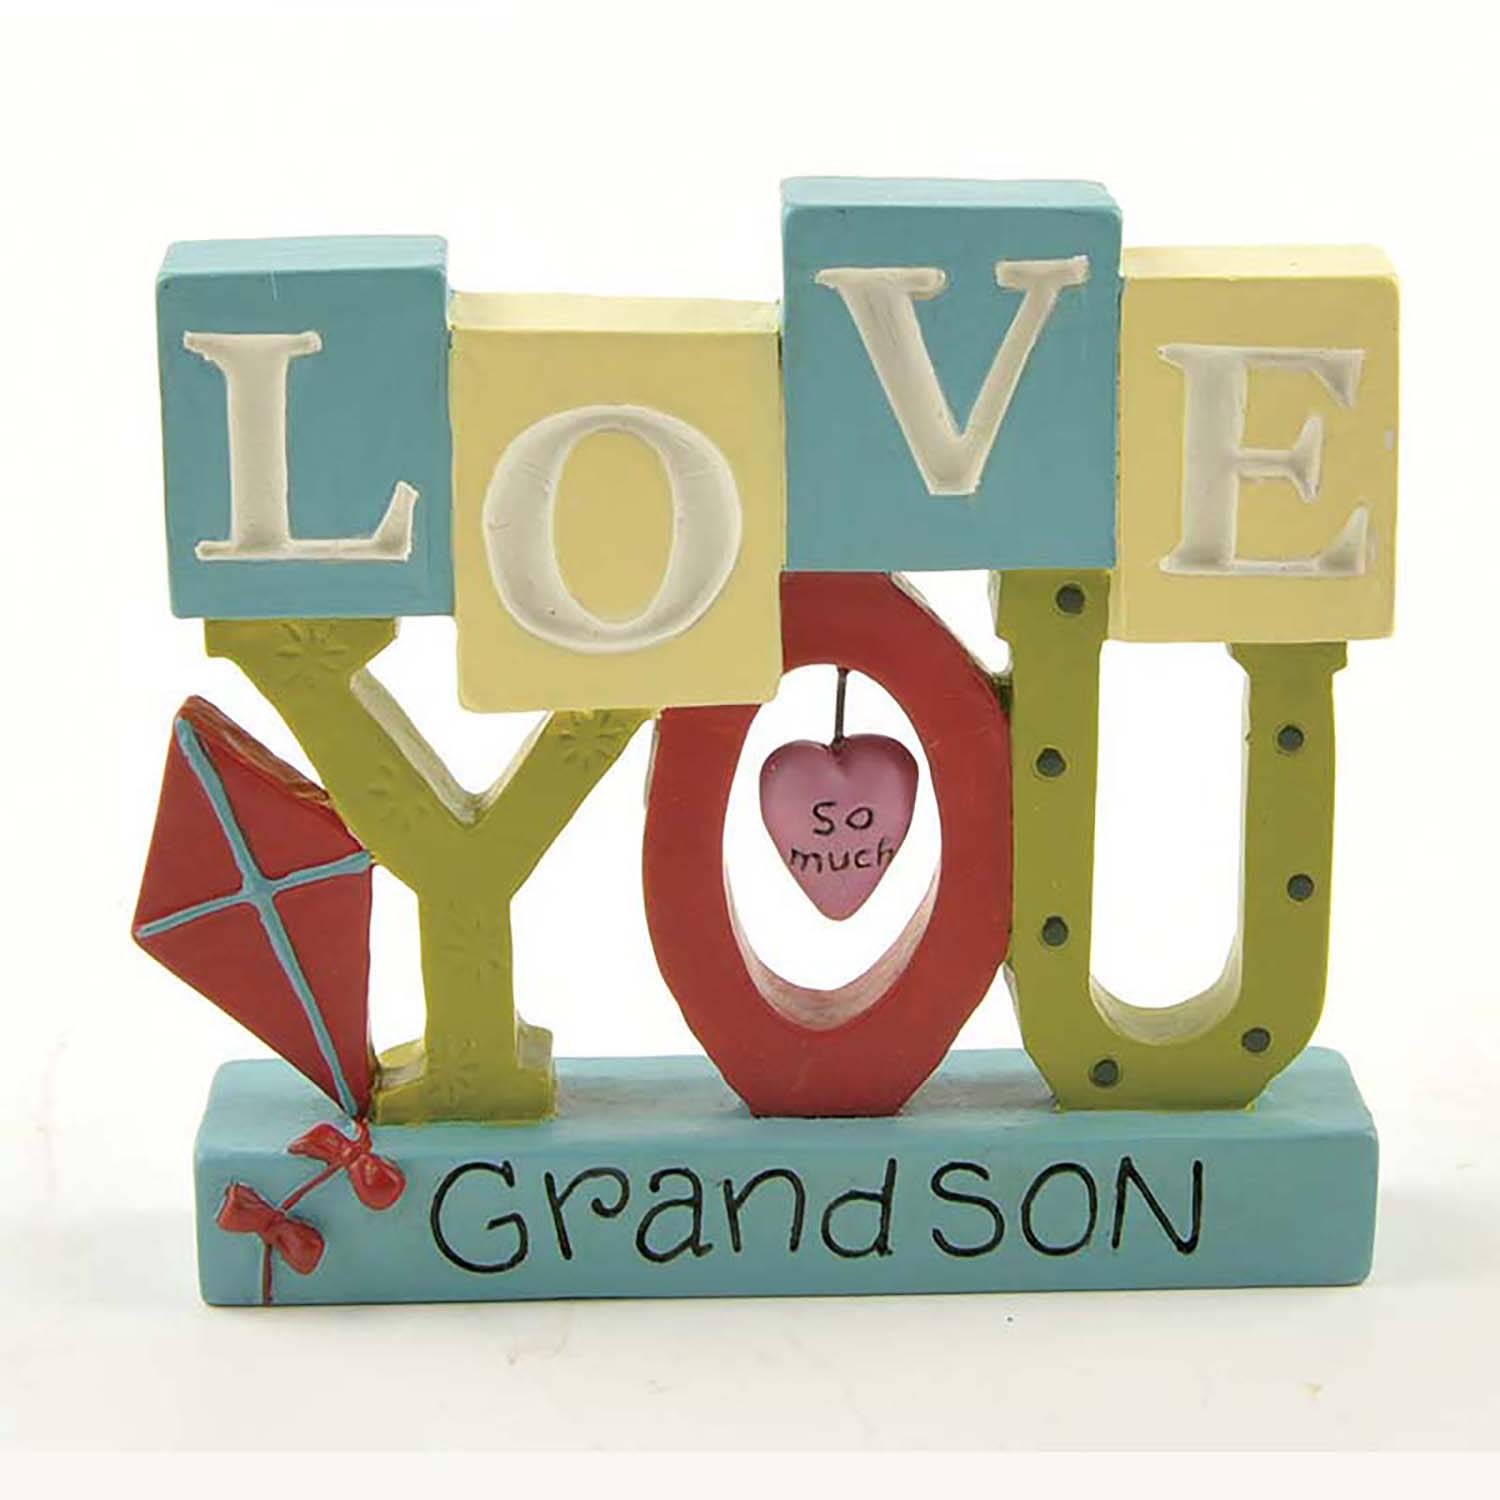 Colorful Resin 'LOVE YOU Grandson' Decorative Letter Blocks with Kite and Heart Accents – Perfect Gift for Grandparents to Grandson1411-89216